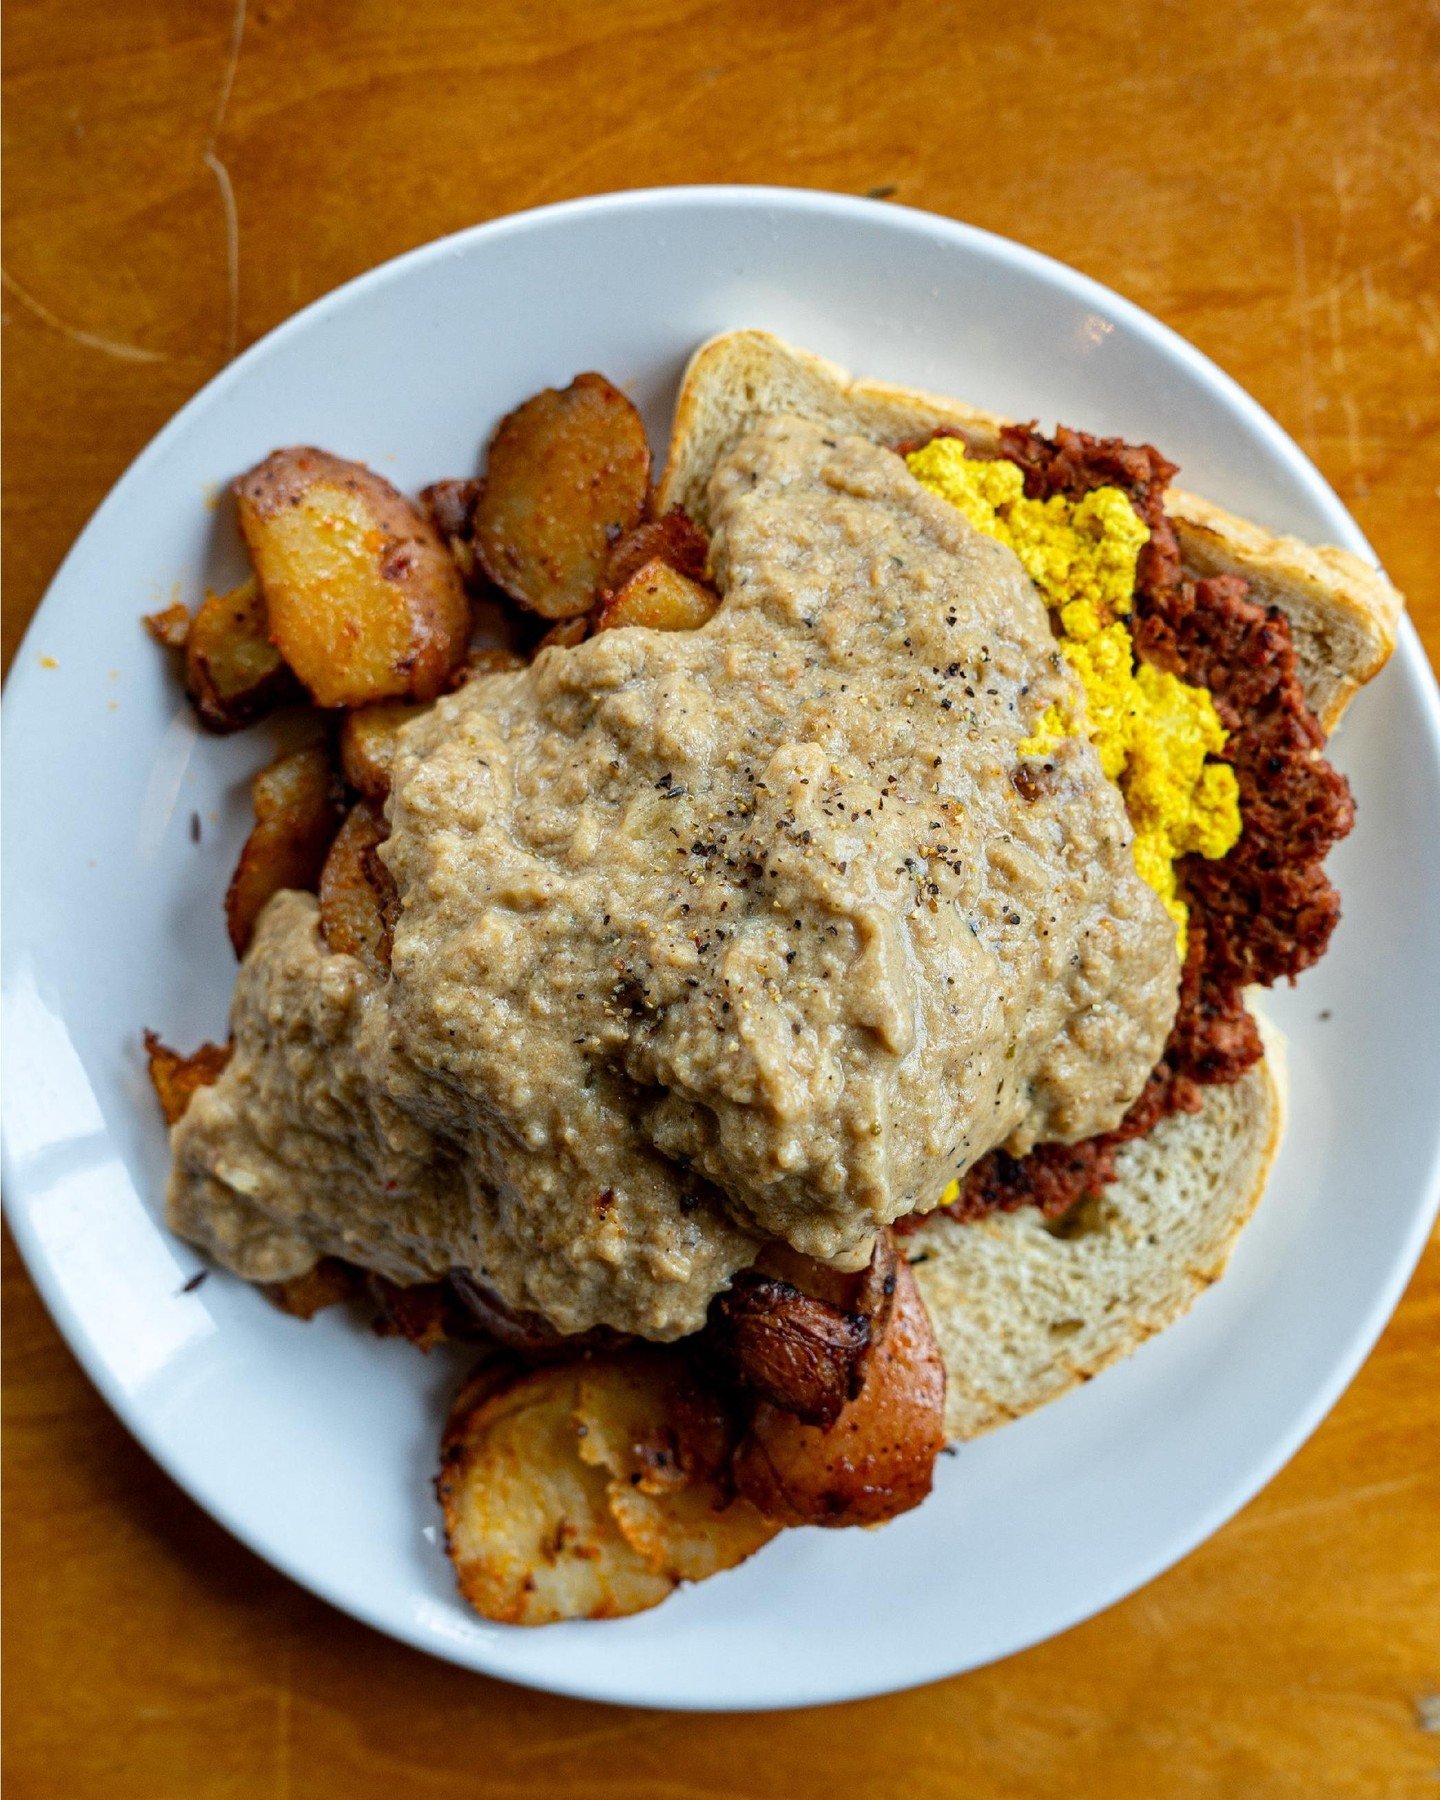 Did you know we have a completely ~vegan~ version of our infamous house slinger? 👀

Vegan sausage, tofu eggs, rooster potatoes, vegan gravy, on sourdough toast

Both locations open until 2pm today!